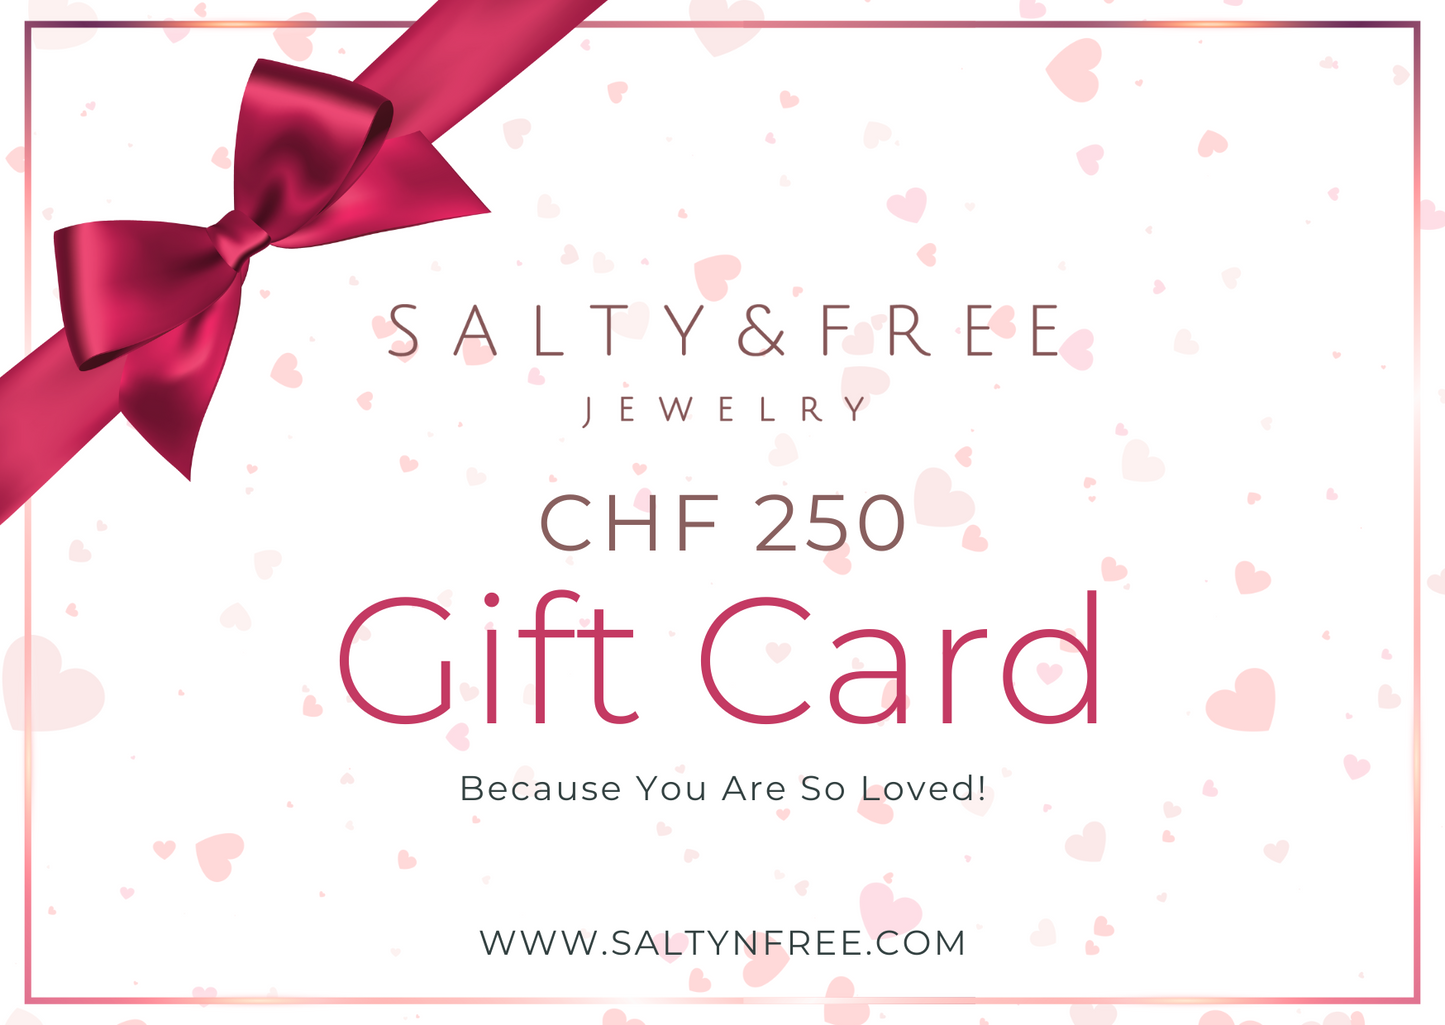 Salty & Free Gift Card "Because You Are So Loved!"